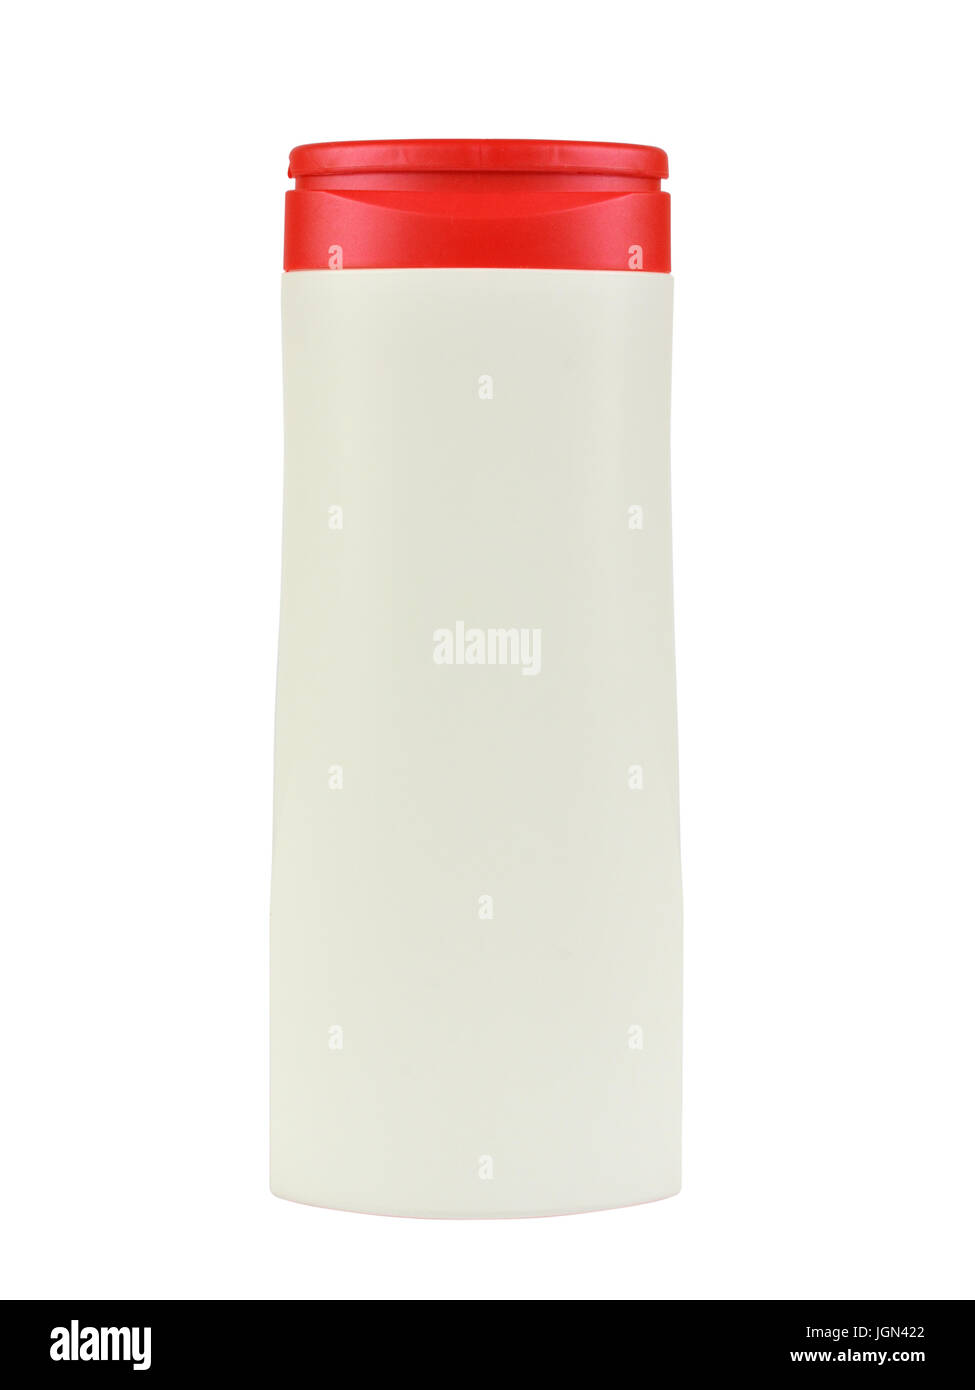 Closed white plastic dispenser with red cap for the skin care lotion or shampoo, without any label - on a white background Stock Photo